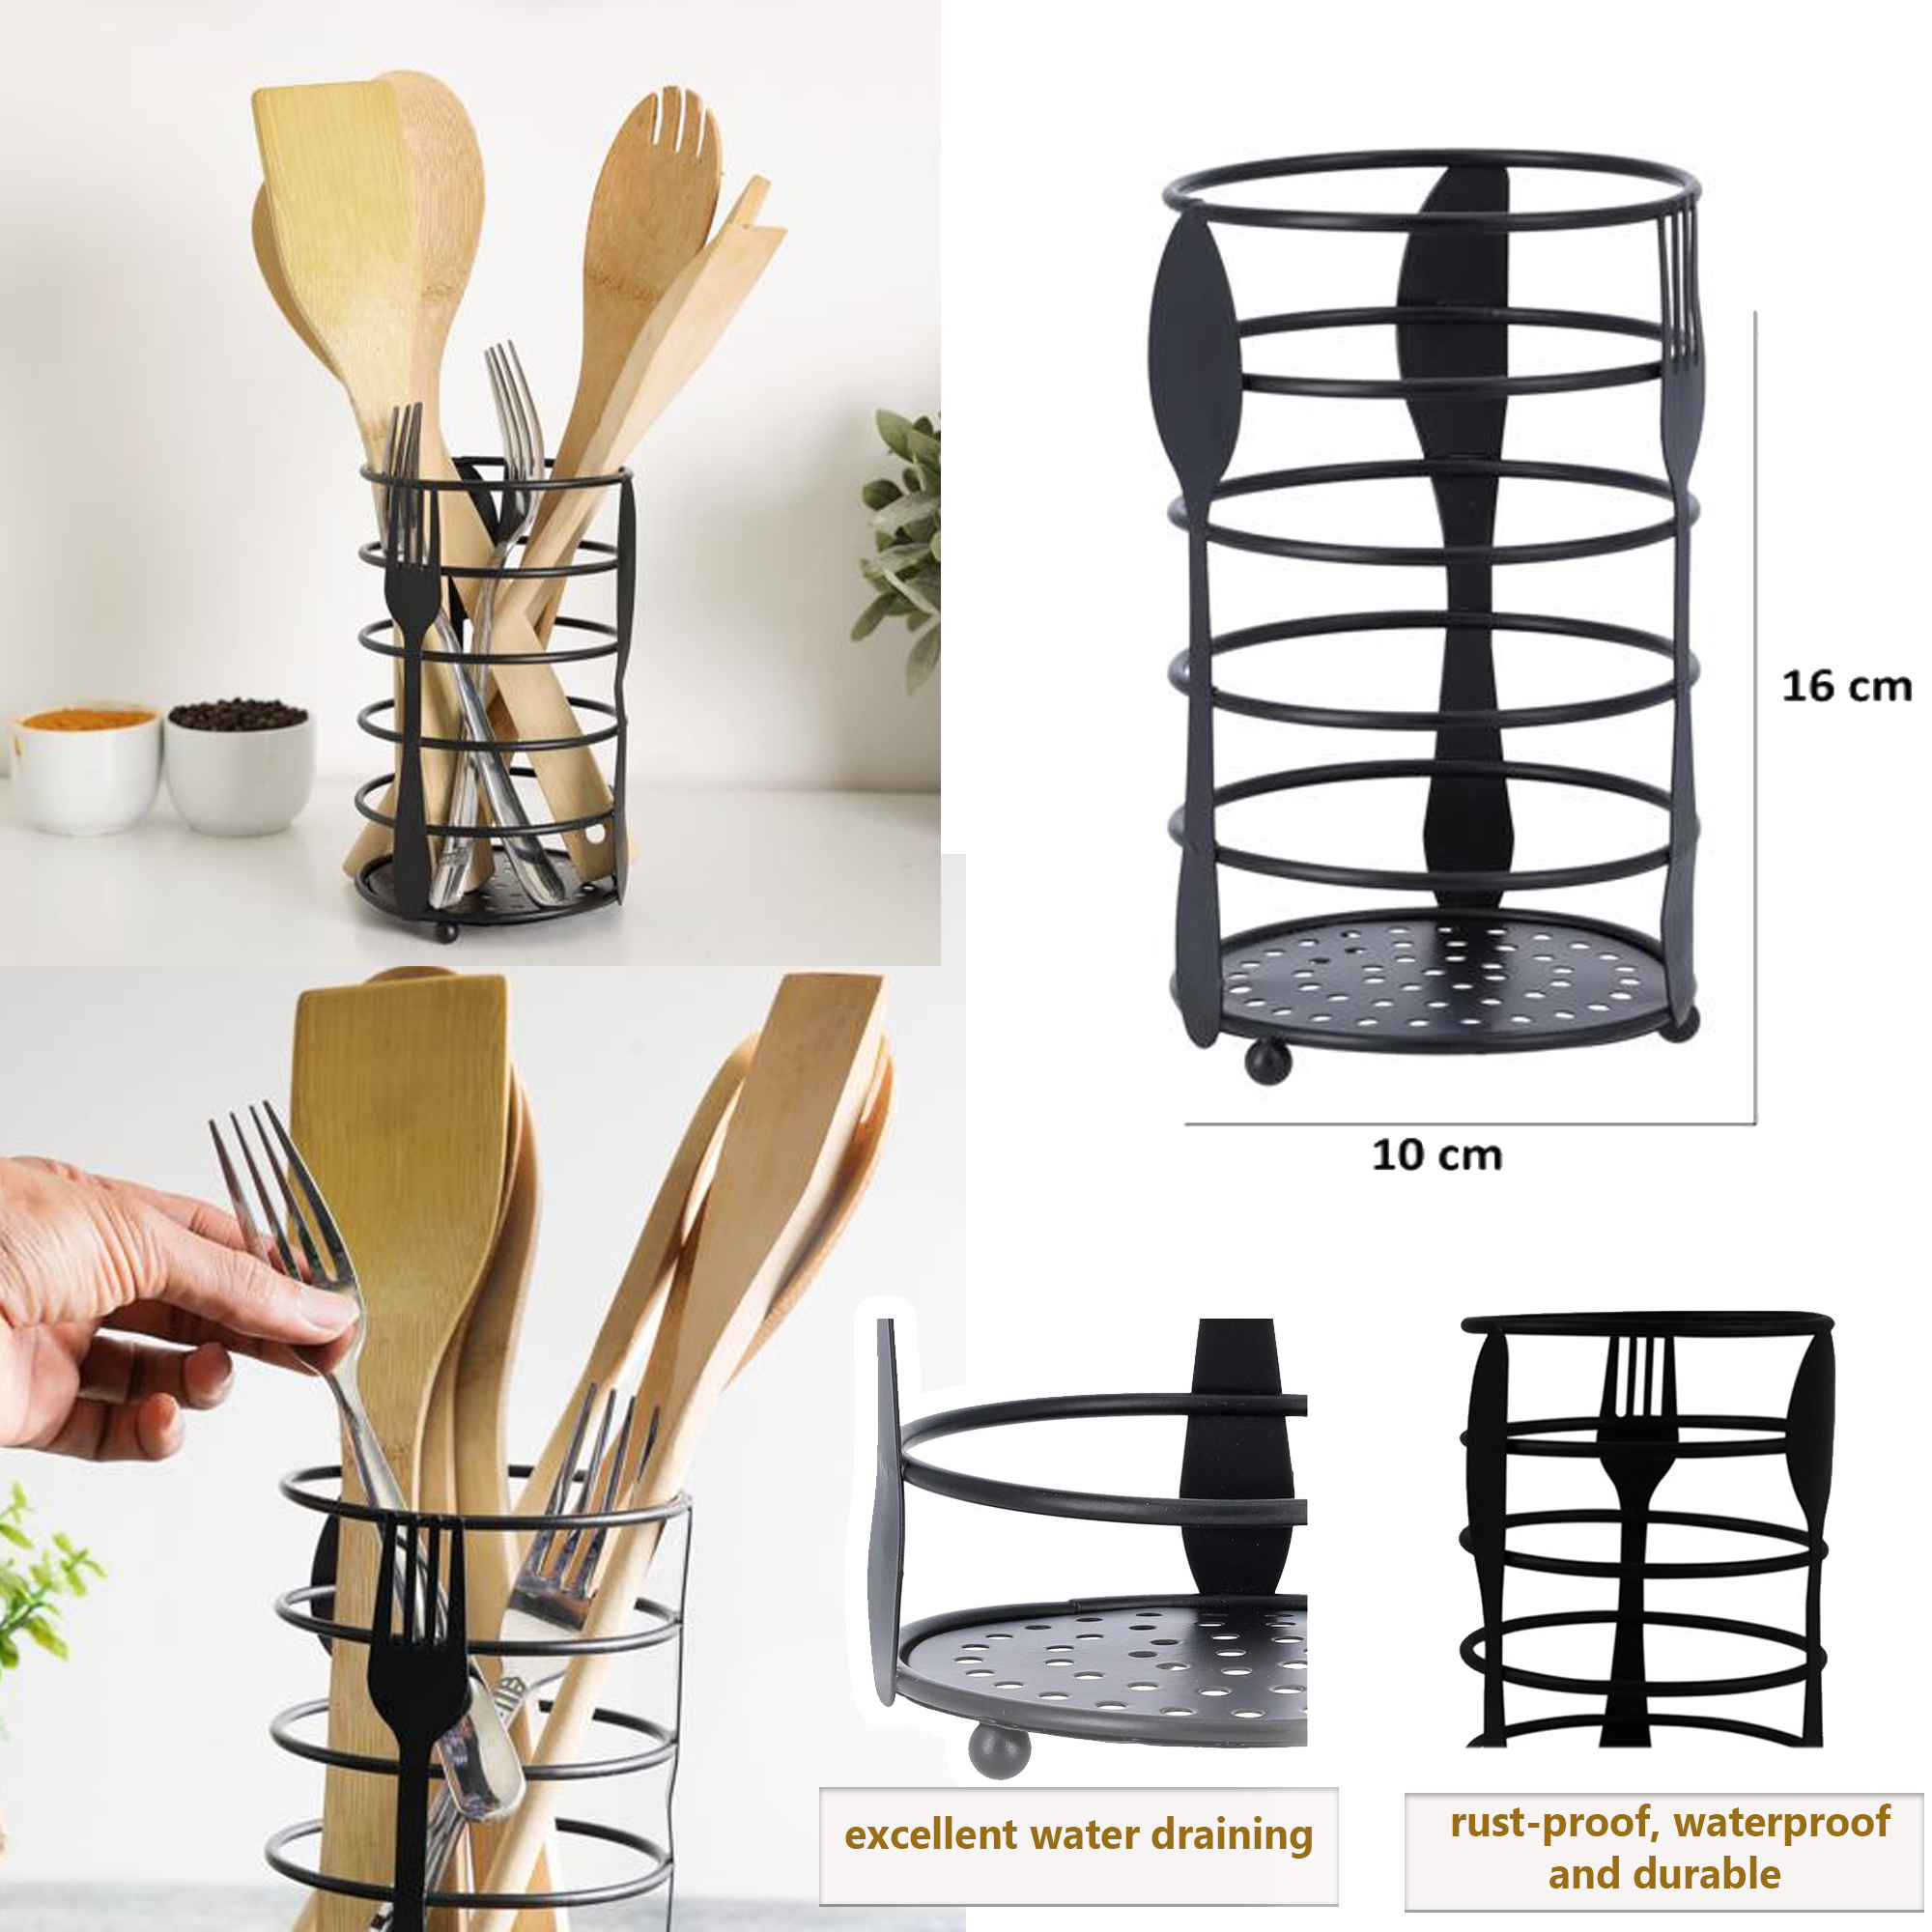 Cutlery+Holder+with+Drain+Base%2C+Premium+Quality+Powder+Coated+Iron++Storage+for+Countertop+Organizer+Cooking+Crock+for+Kitchen+Organization+and+Storage+Flatware+Caddy